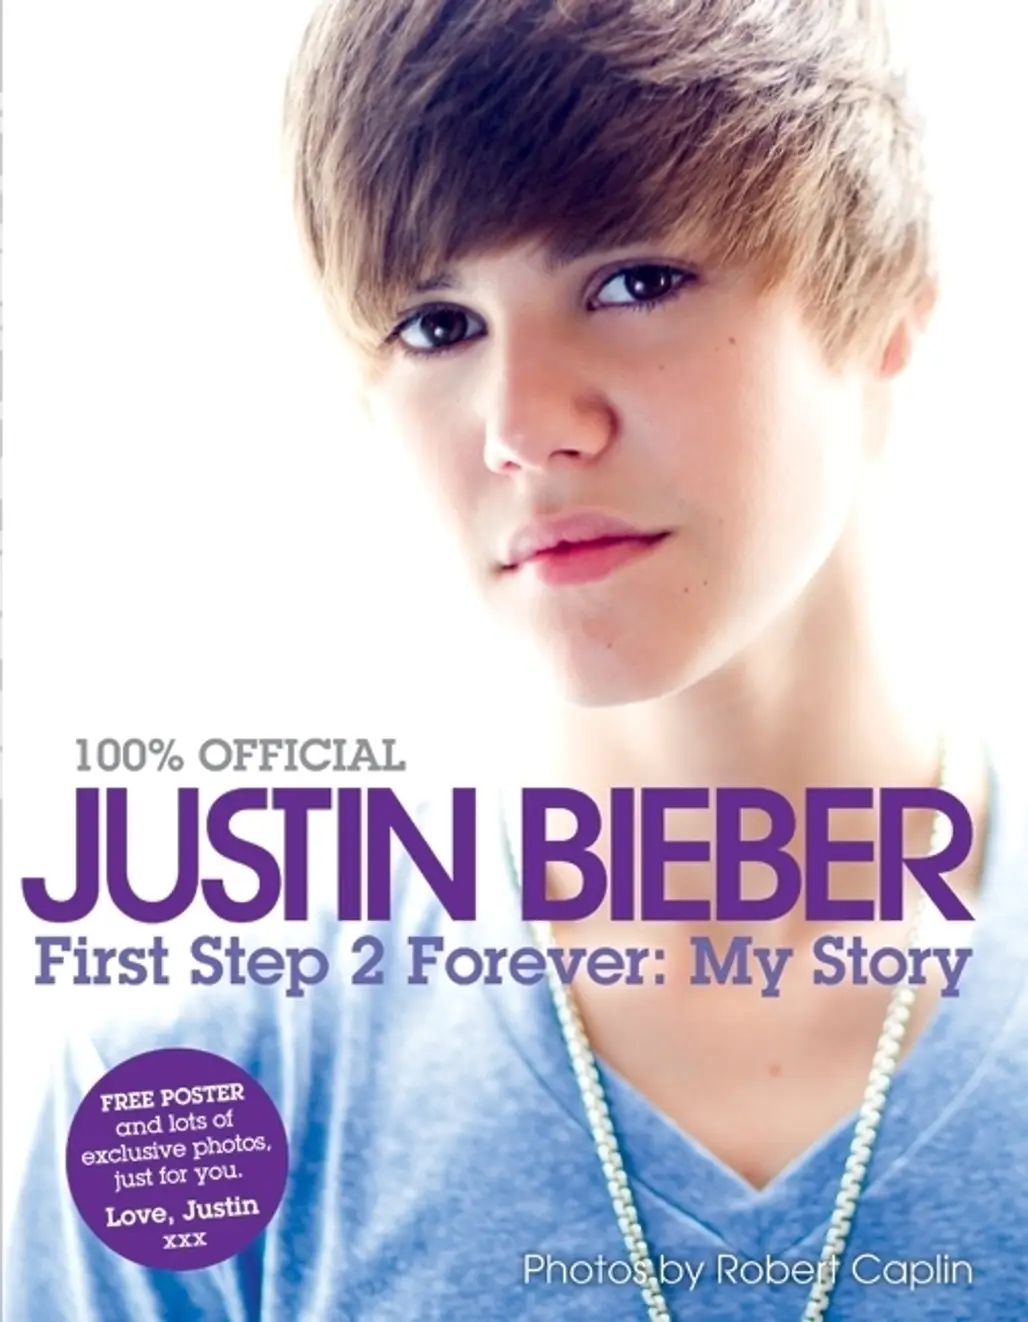 Justin Bieber’s ‘First Step 2 Forever’